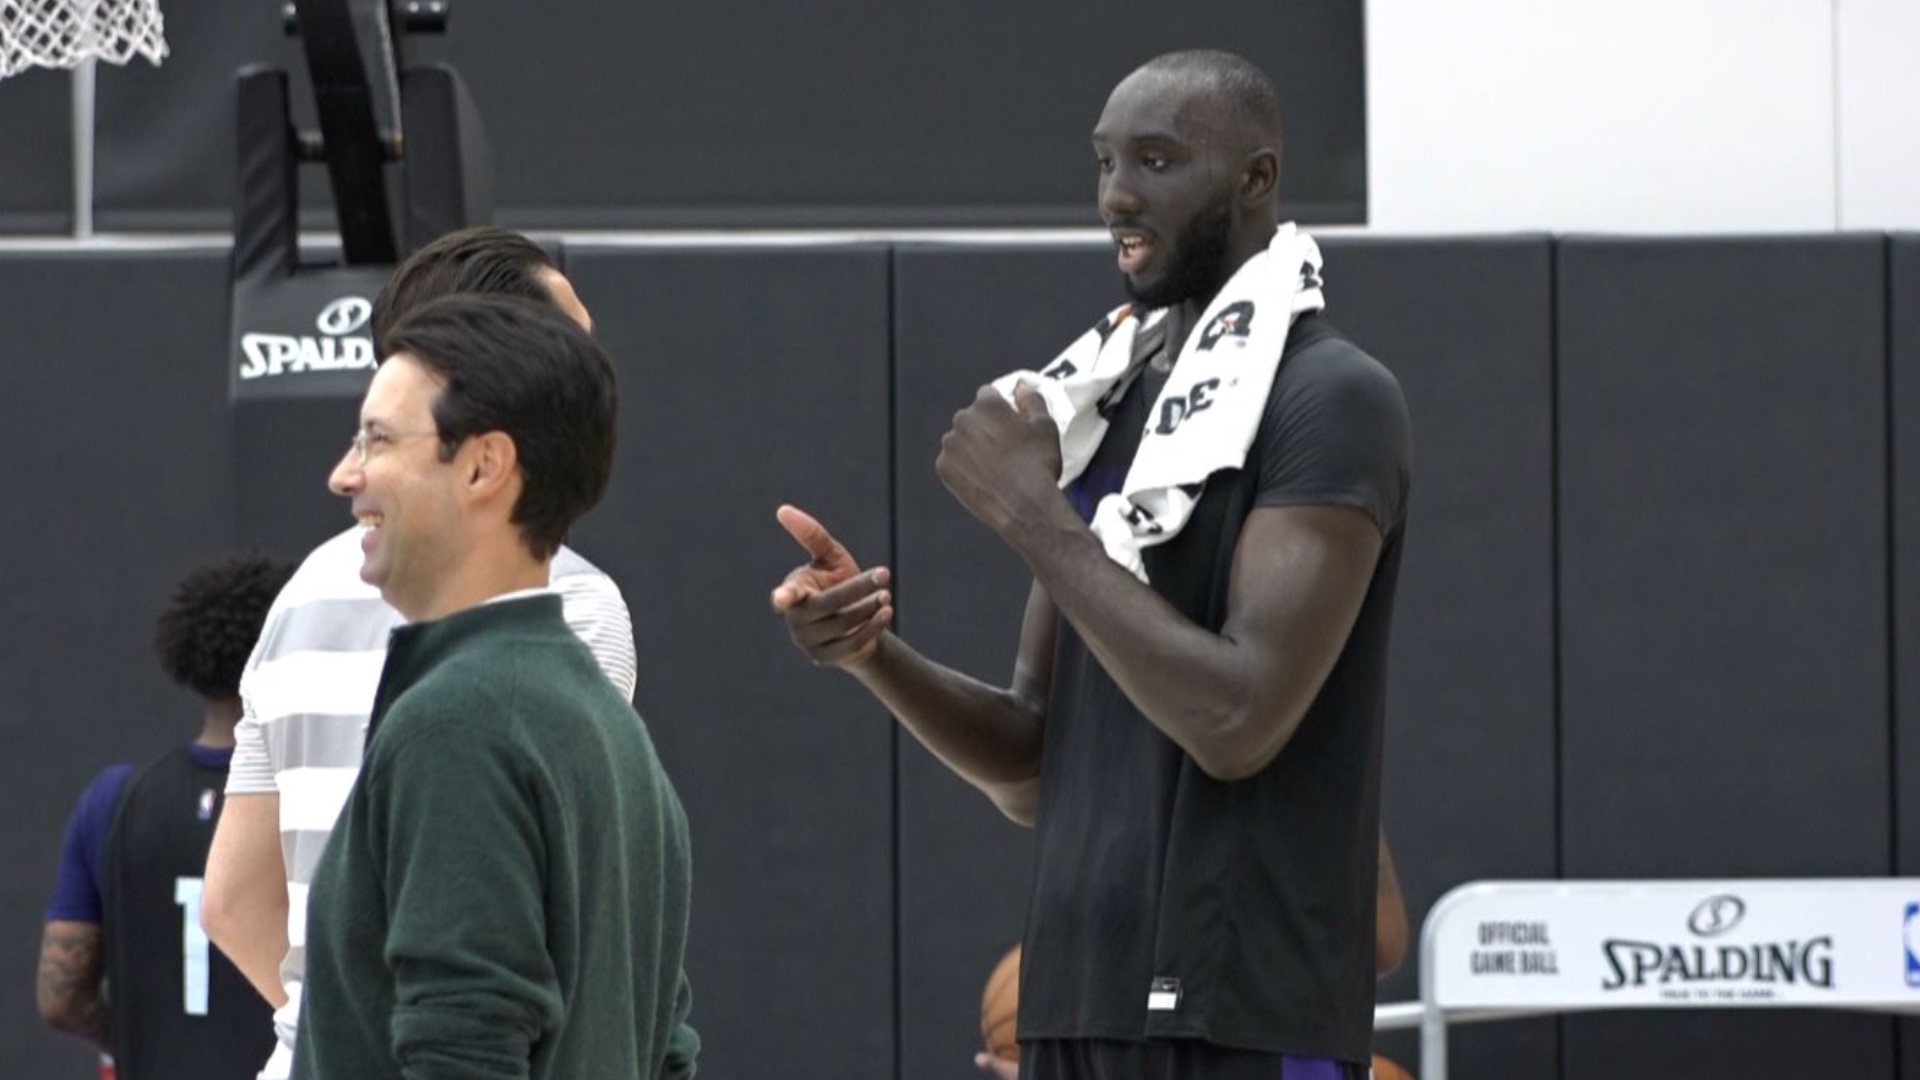 UCF's 7-foot-7 center Tacko Fall talks about his draft workout in Sacramento with the Kings, the adjustments he feels he must make by making the leap to the NBA and the attention he received in college and in the NCAA Tournament.